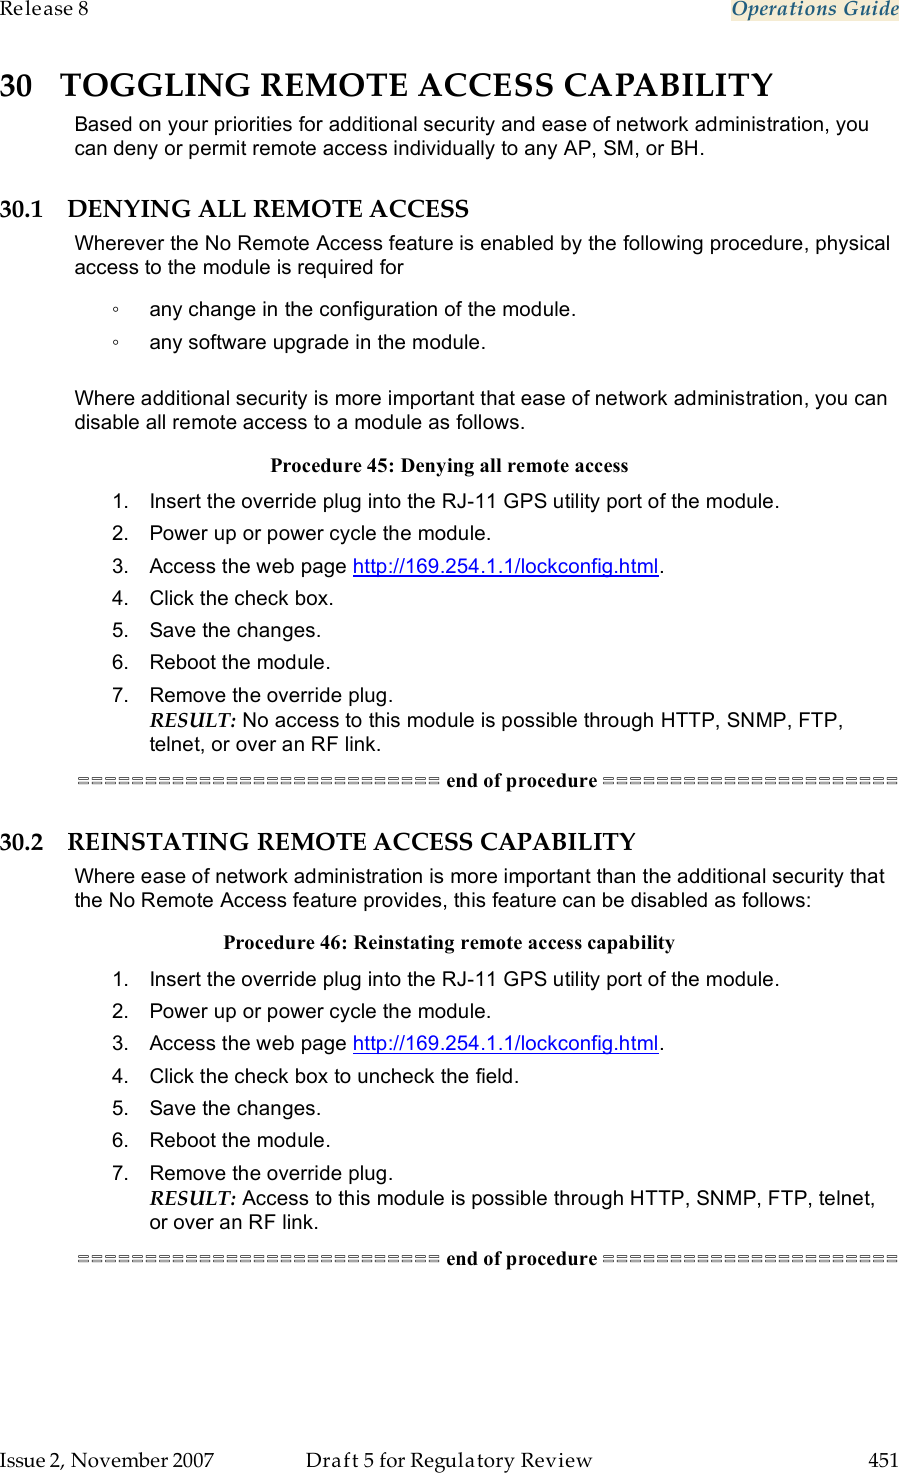 Release 8    Operations Guide   Issue 2, November 2007  Draft 5 for Regulatory Review  451     30 TOGGLING REMOTE ACCESS CAPABILITY Based on your priorities for additional security and ease of network administration, you can deny or permit remote access individually to any AP, SM, or BH. 30.1 DENYING ALL REMOTE ACCESS Wherever the No Remote Access feature is enabled by the following procedure, physical access to the module is required for  ◦  any change in the configuration of the module. ◦  any software upgrade in the module.  Where additional security is more important that ease of network administration, you can disable all remote access to a module as follows. Procedure 45: Denying all remote access 1.  Insert the override plug into the RJ-11 GPS utility port of the module. 2.  Power up or power cycle the module. 3.  Access the web page http://169.254.1.1/lockconfig.html. 4.  Click the check box. 5.  Save the changes. 6.  Reboot the module. 7.  Remove the override plug. RESULT: No access to this module is possible through HTTP, SNMP, FTP, telnet, or over an RF link. =========================== end of procedure ====================== 30.2 REINSTATING REMOTE ACCESS CAPABILITY Where ease of network administration is more important than the additional security that the No Remote Access feature provides, this feature can be disabled as follows: Procedure 46: Reinstating remote access capability 1.  Insert the override plug into the RJ-11 GPS utility port of the module. 2.  Power up or power cycle the module. 3.  Access the web page http://169.254.1.1/lockconfig.html. 4.  Click the check box to uncheck the field. 5.  Save the changes. 6.  Reboot the module. 7.  Remove the override plug. RESULT: Access to this module is possible through HTTP, SNMP, FTP, telnet, or over an RF link. =========================== end of procedure ====================== 